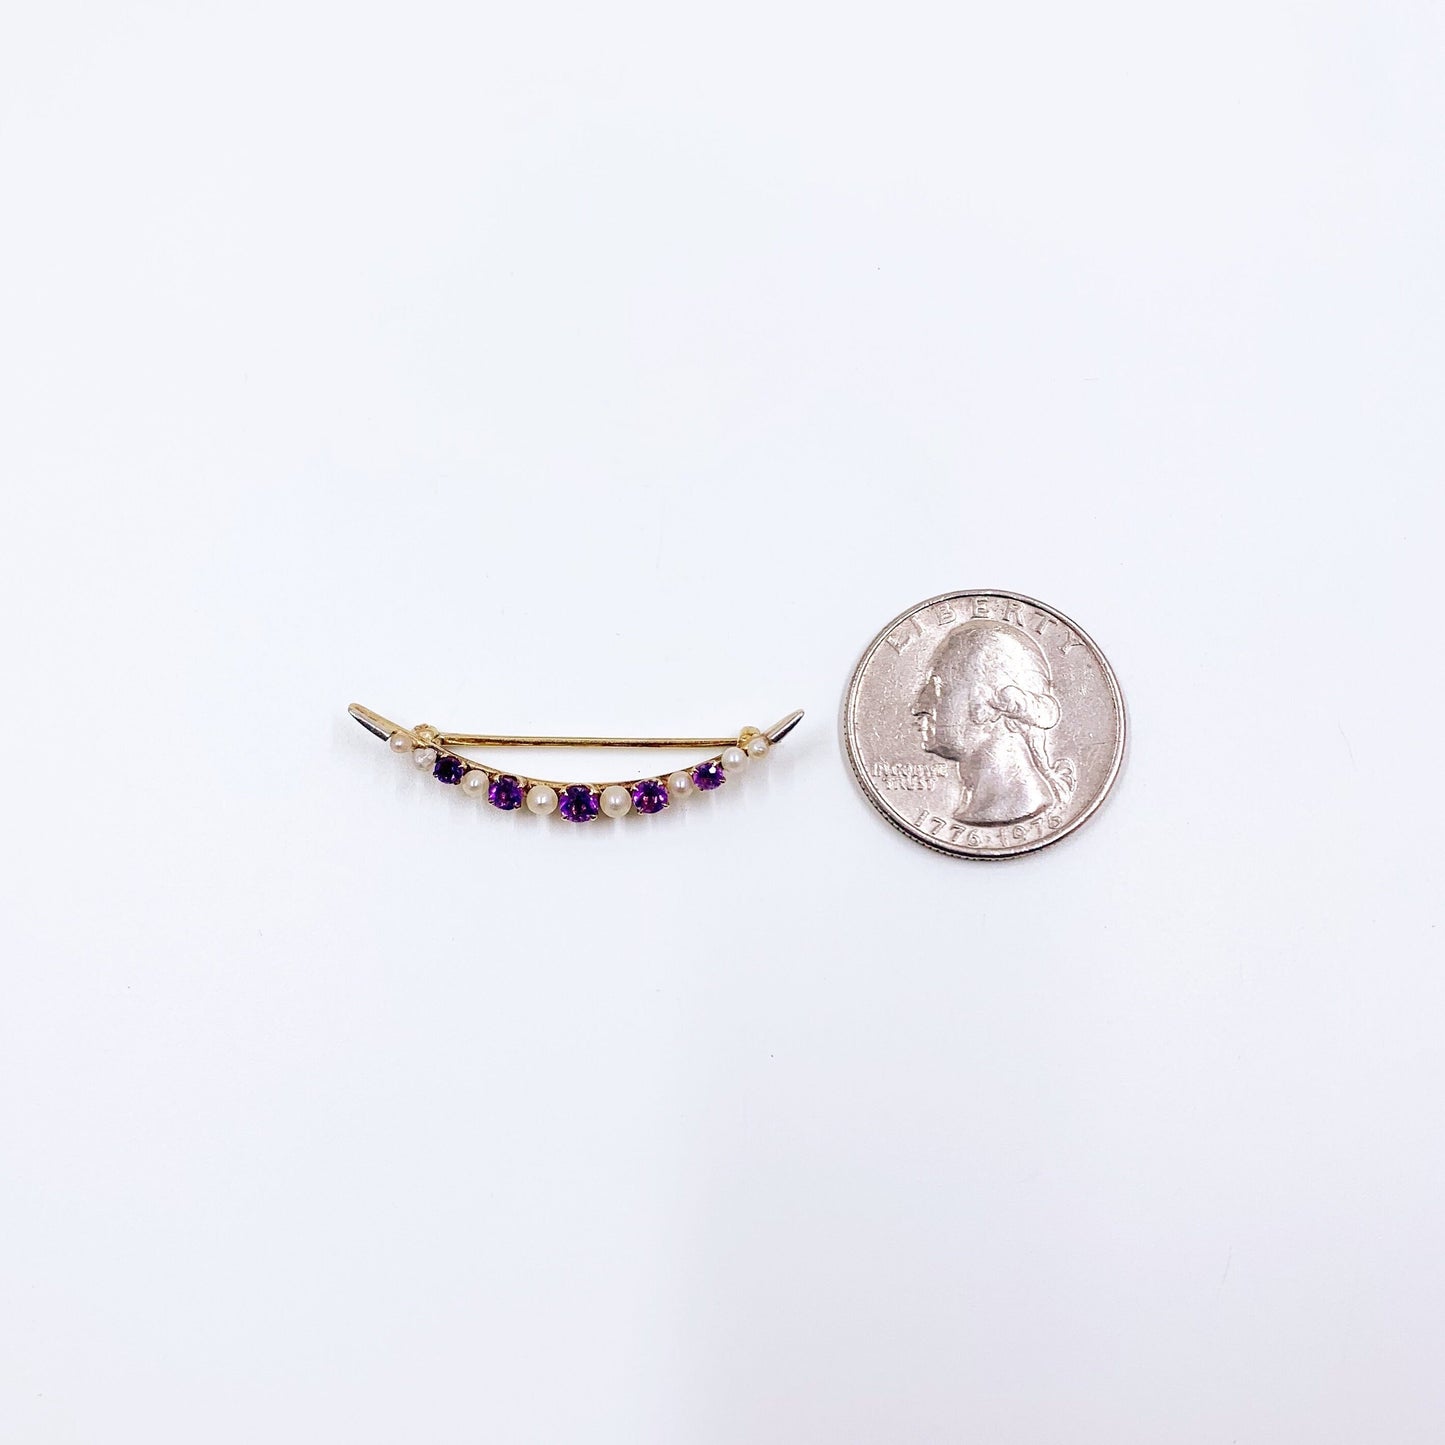 Antique 14k Gold Crescent Moon Amethyst and Seed Pearl Brooch